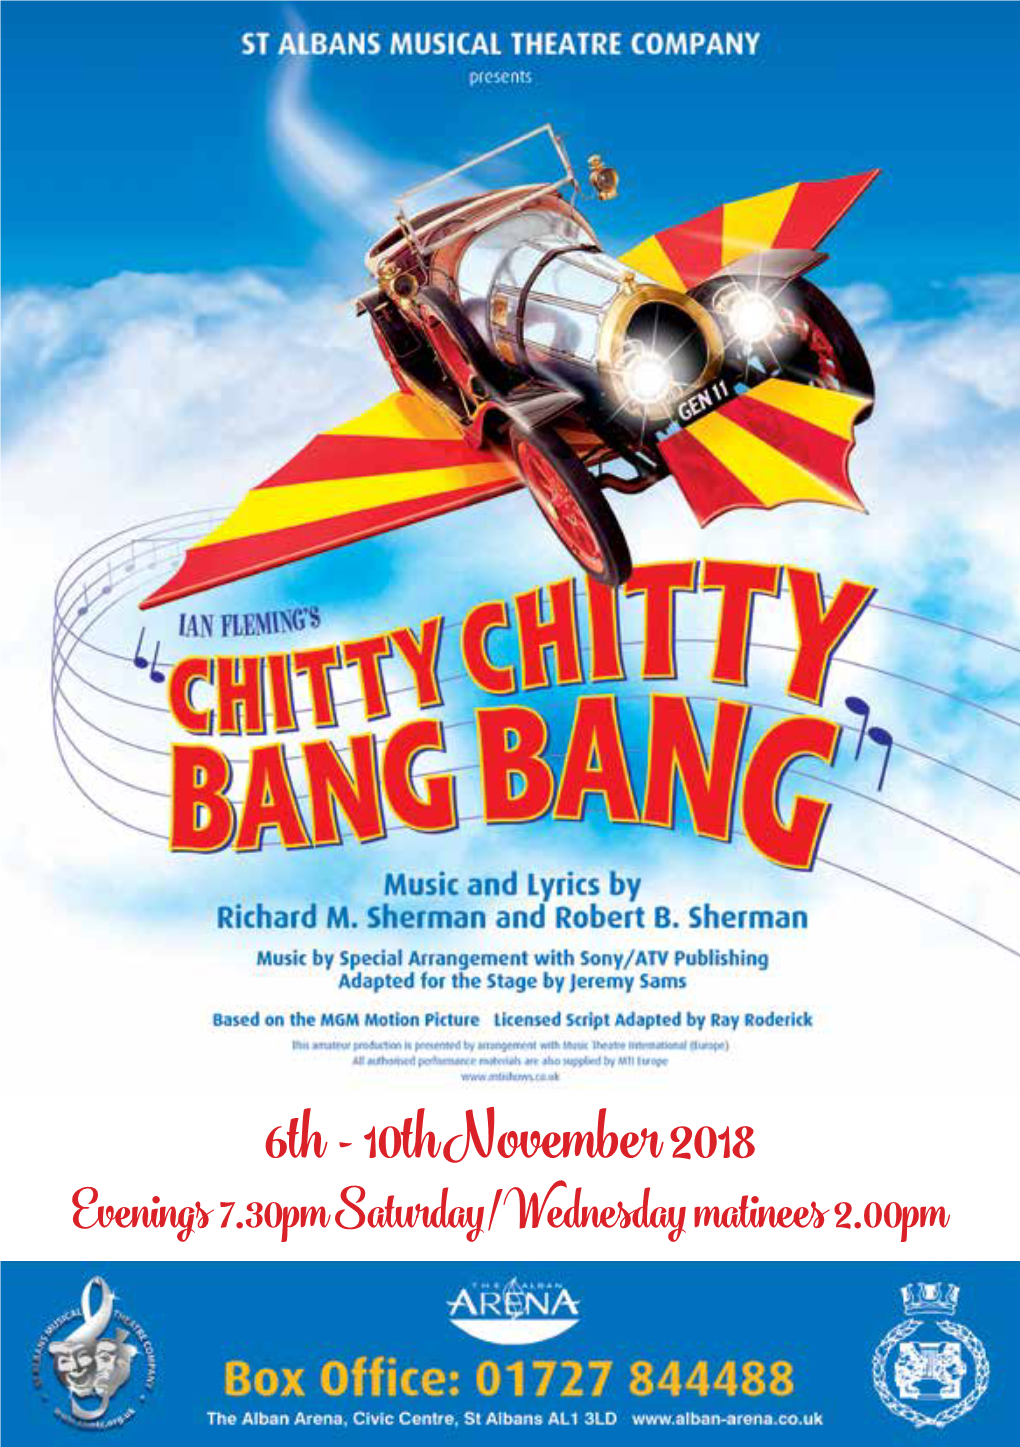 Chitty Chitty Bang Bang, Which Is Probably the Most Ambitious and Technically Demanding Show the Company Has Produced